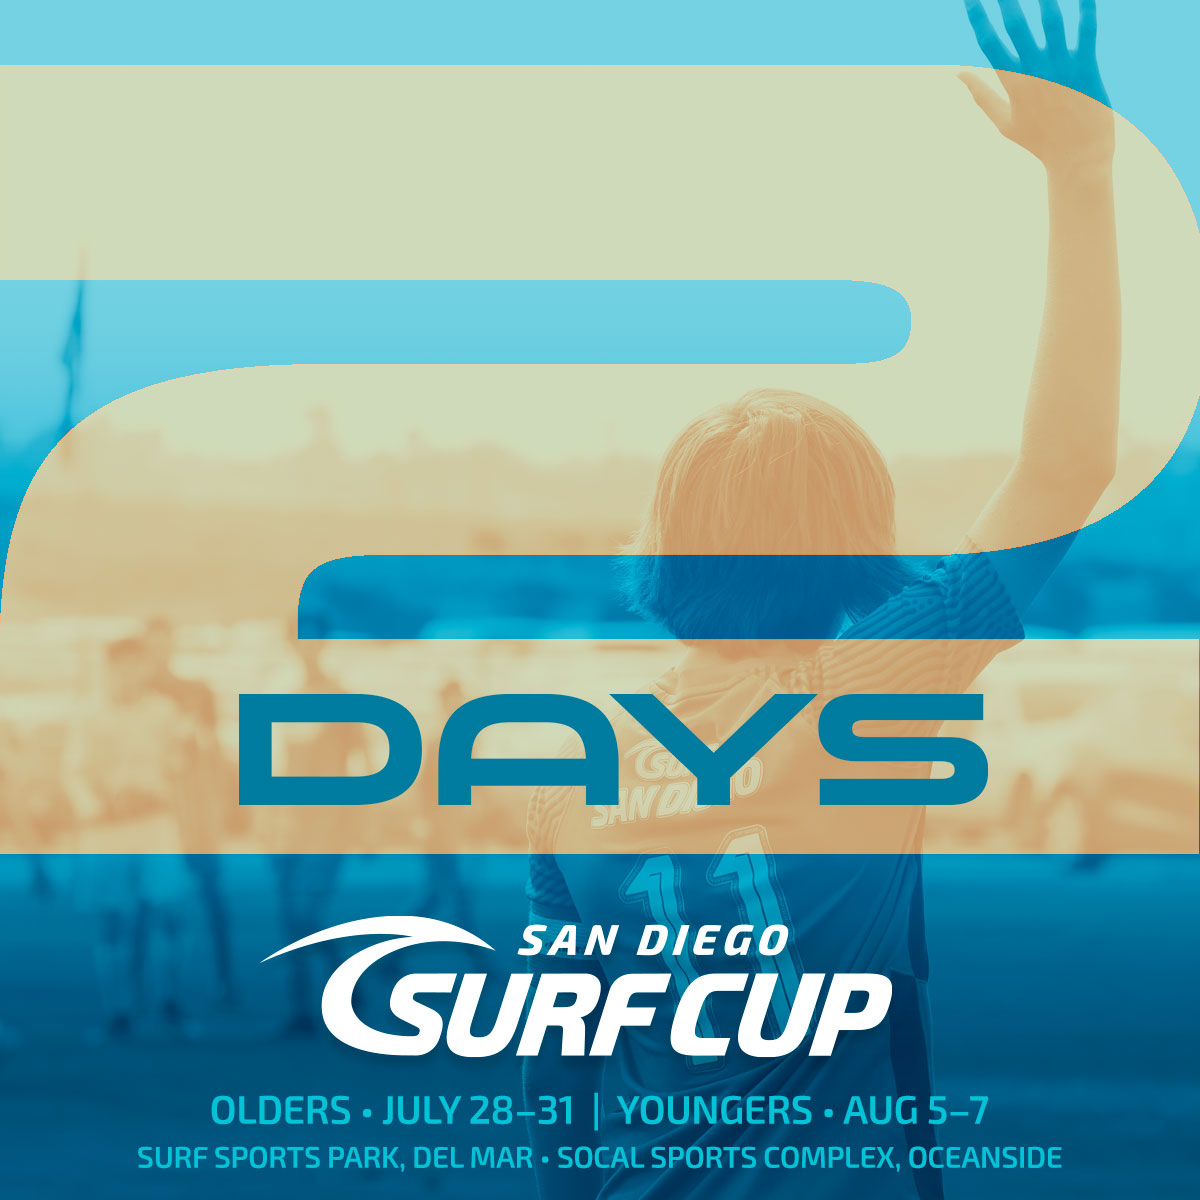 We are TWO DAYS out from our OLDERS event - Are you ready? #SurfCup #BestOfTheBest